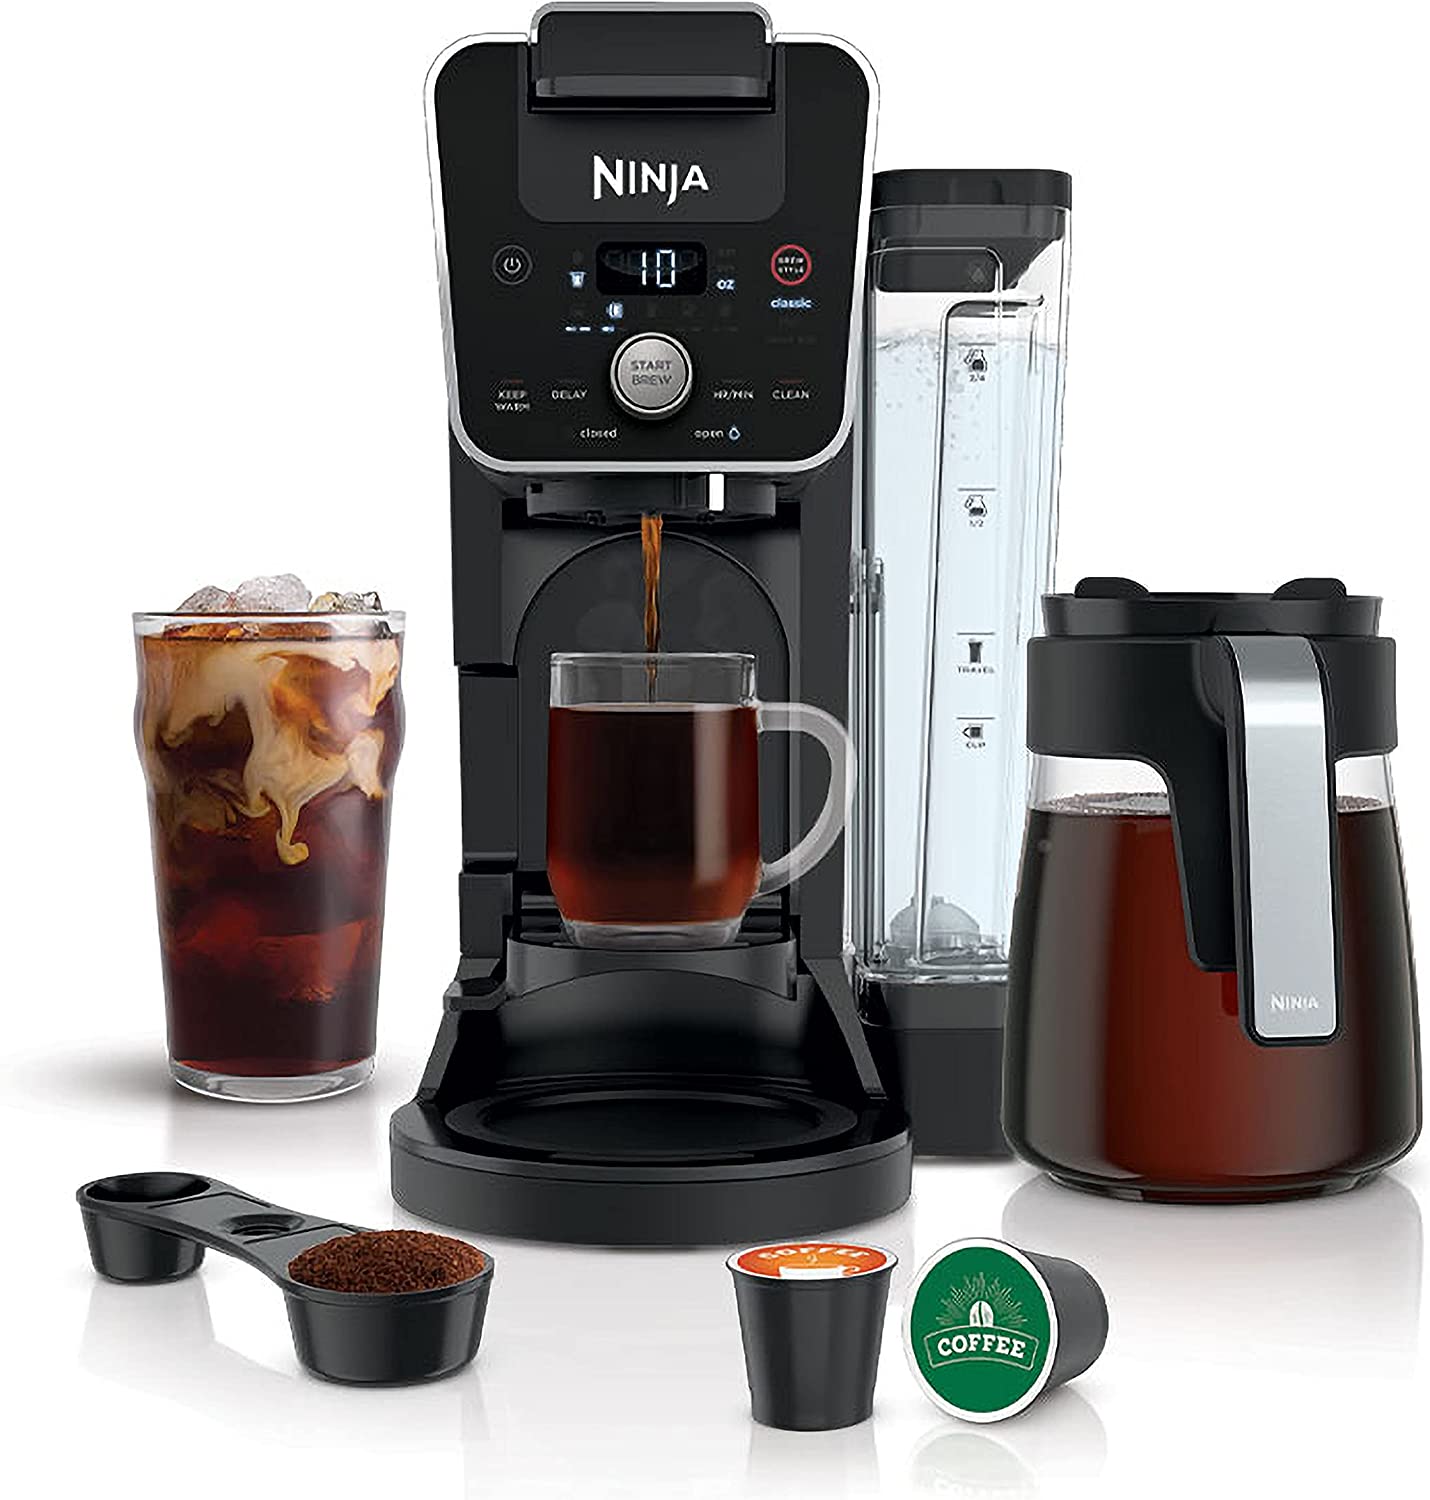 Ninja CFP201 DualBrew System 12-Cup Coffee Maker Review